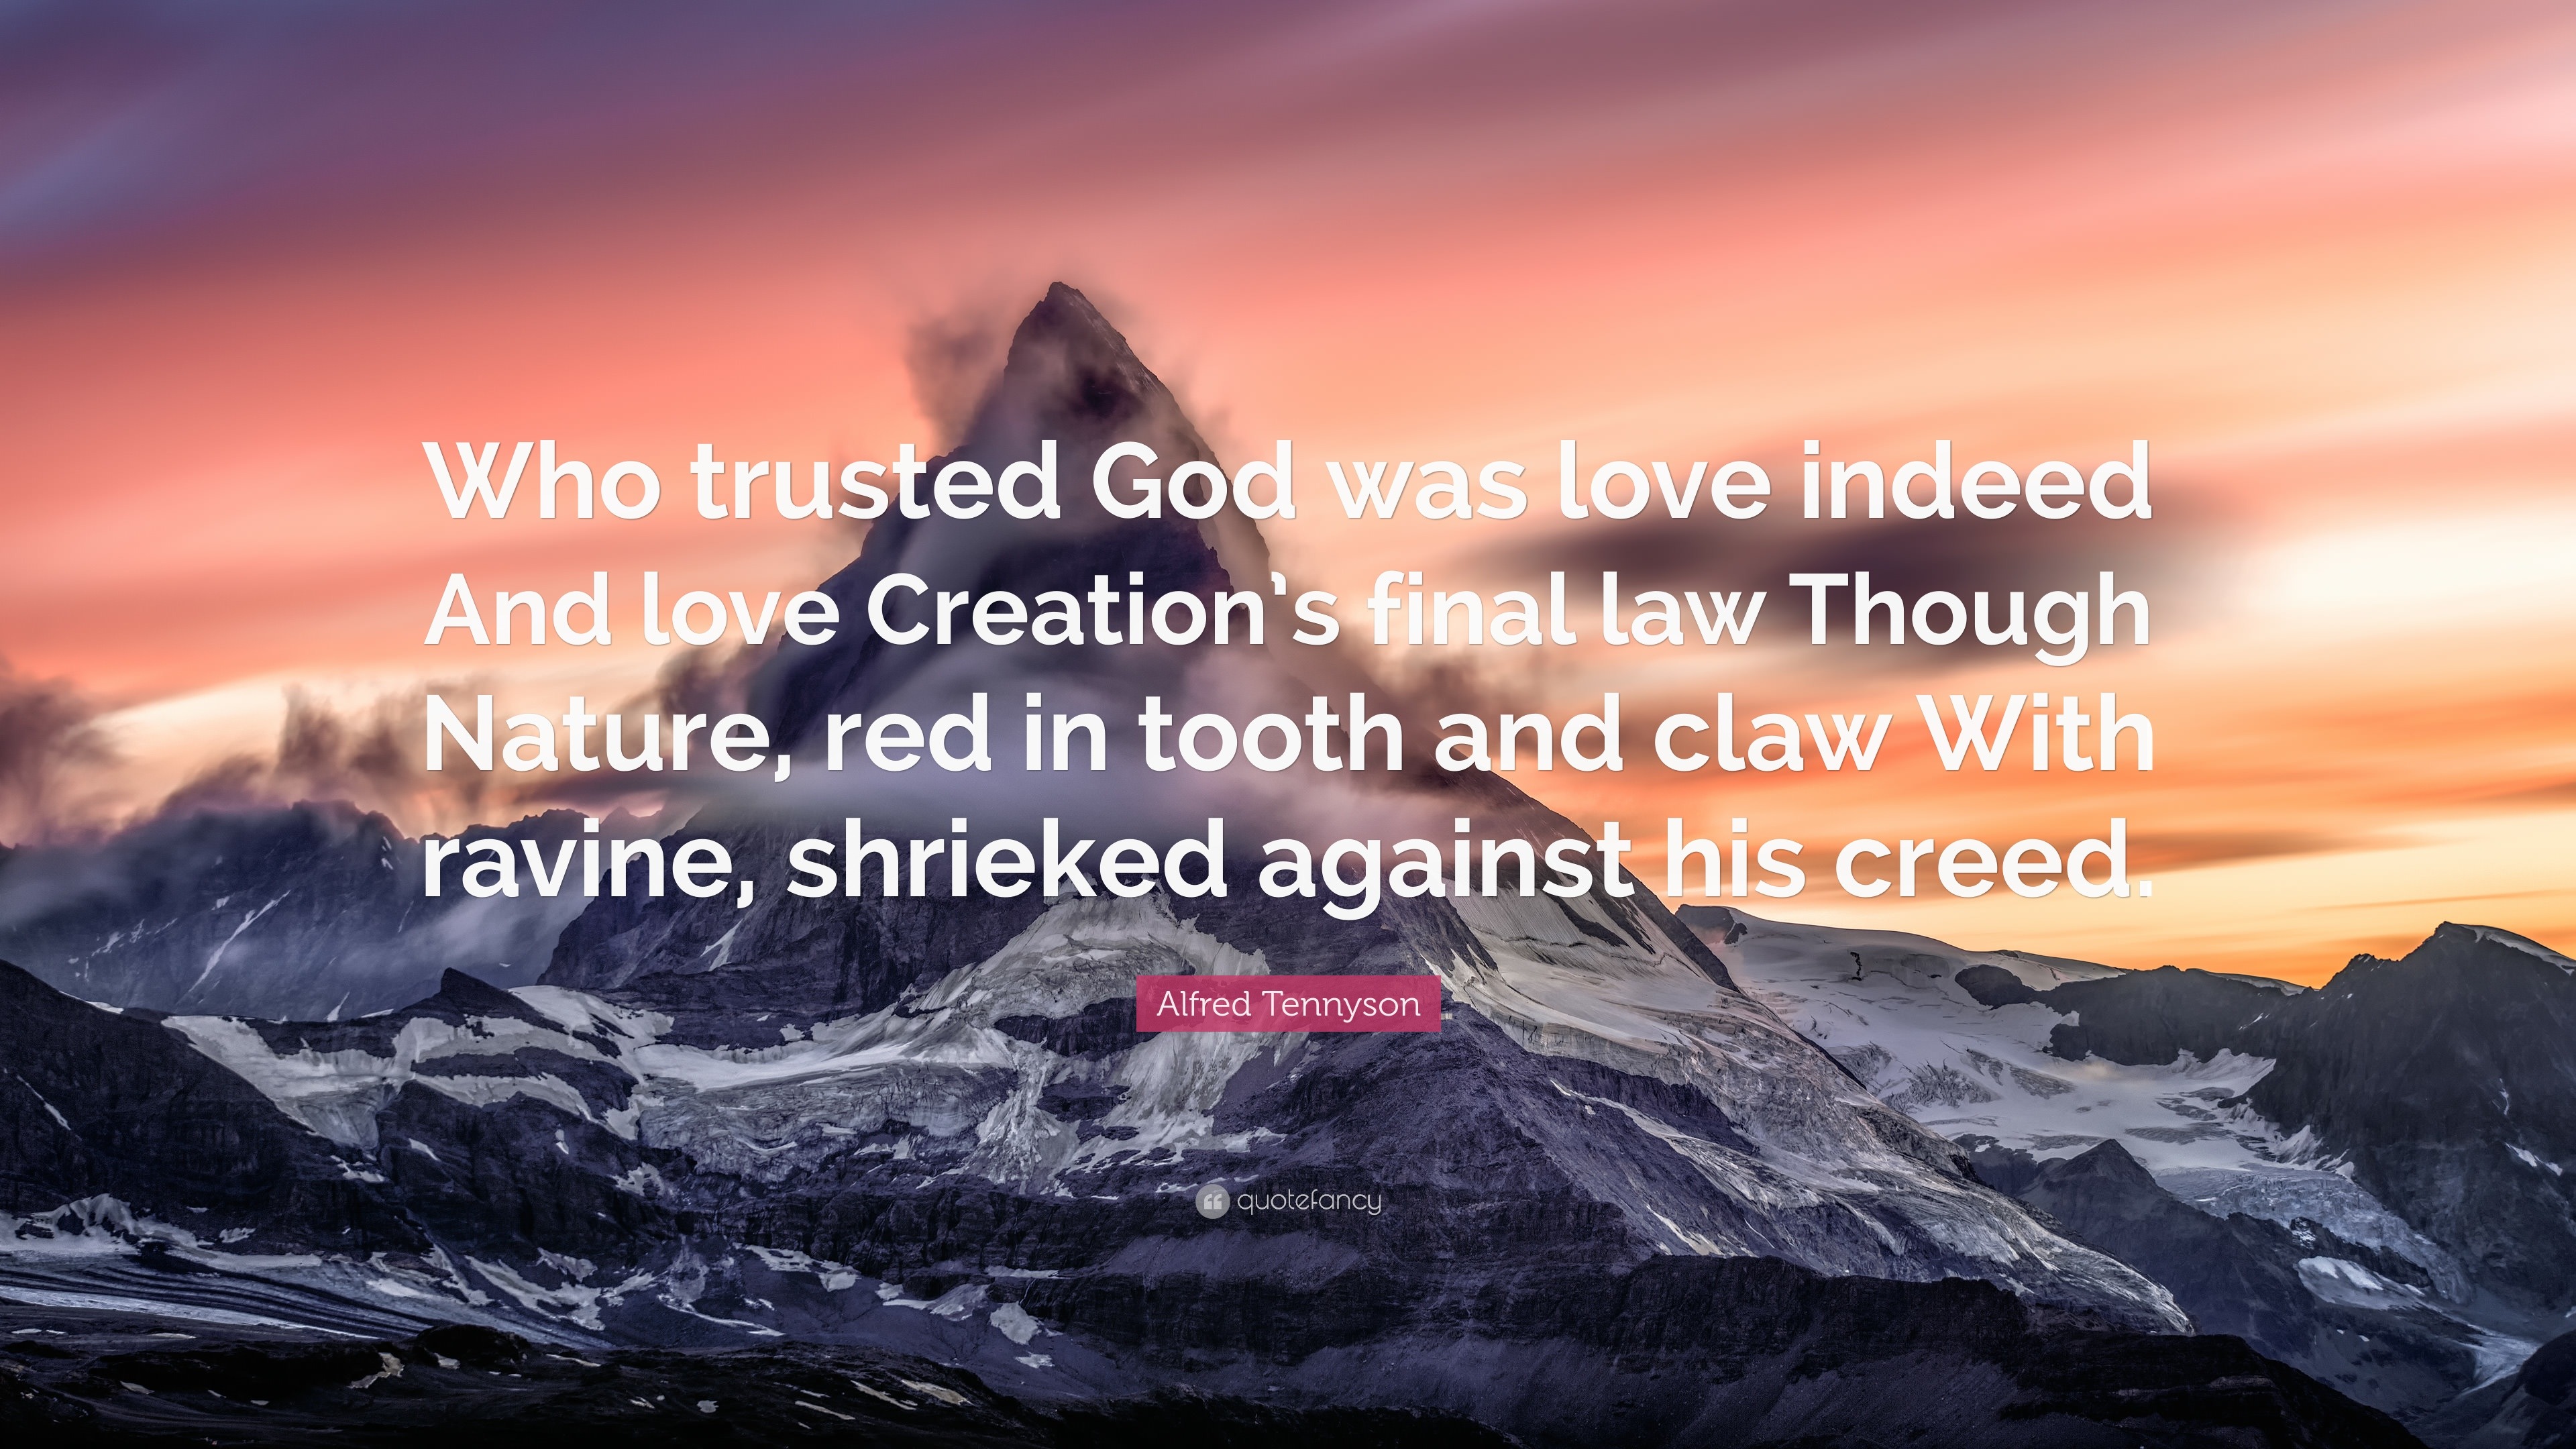 Alfred Tennyson Quote: “Who trusted God love indeed love Creation's final law Though Nature, red in tooth and claw With ravine, shrieked...”